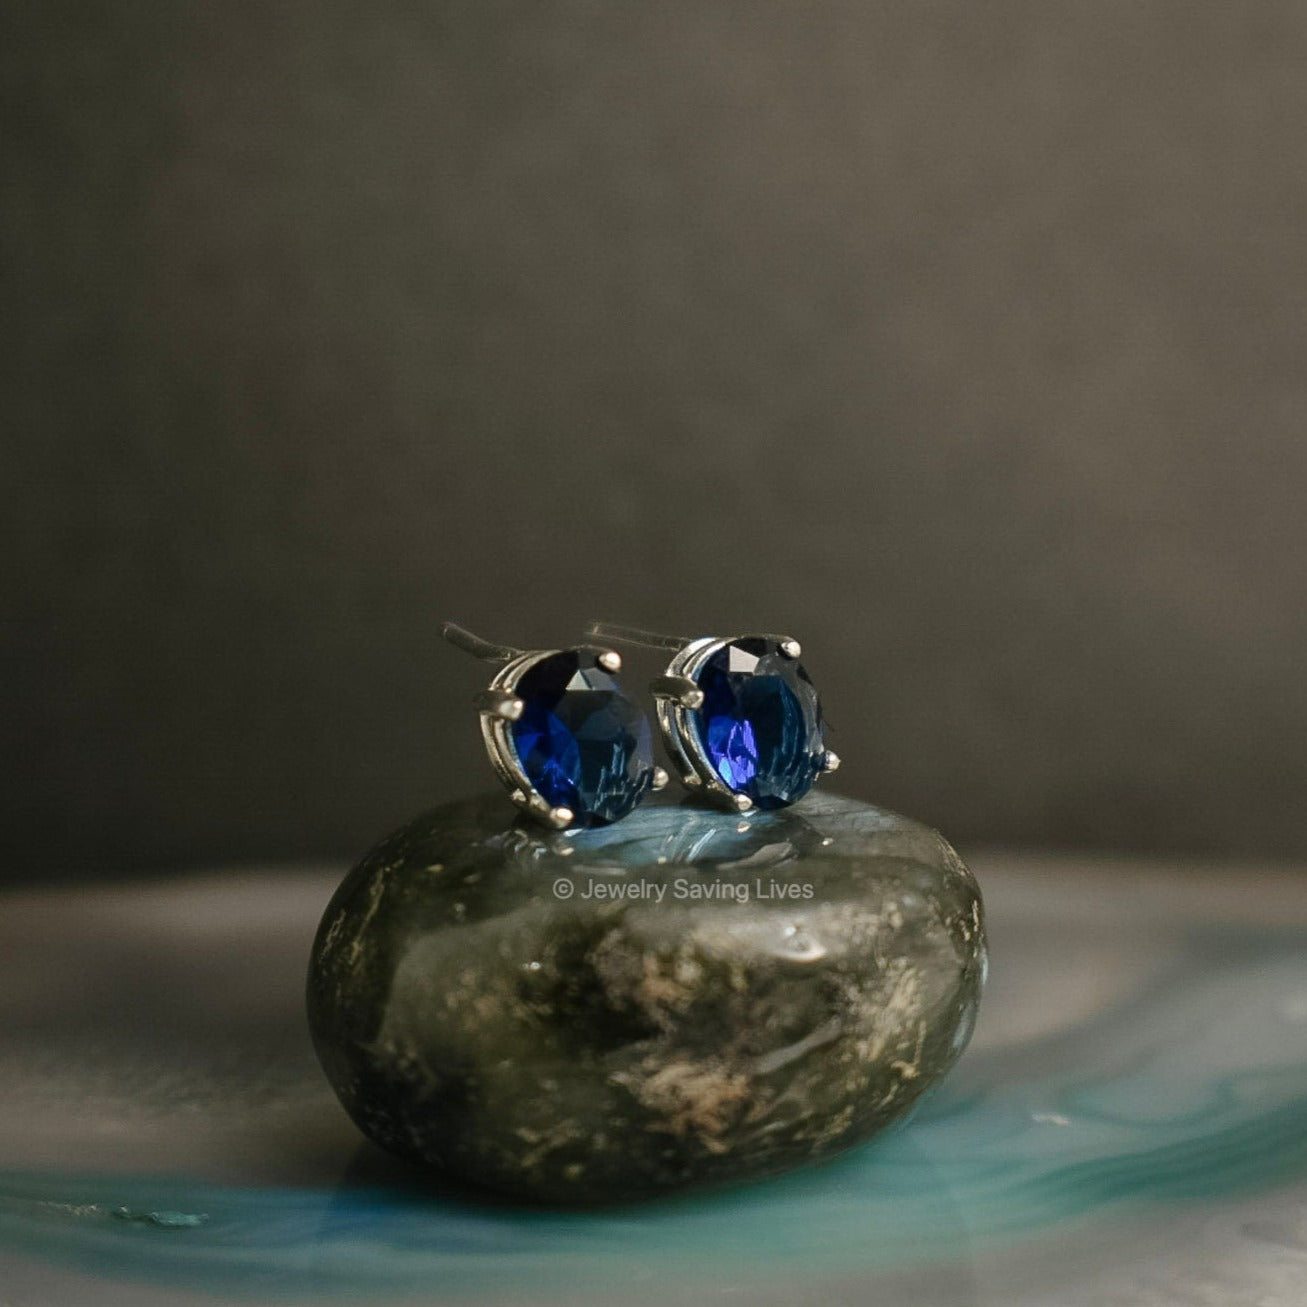 Faceted Oval Sapphire Stud Earrings